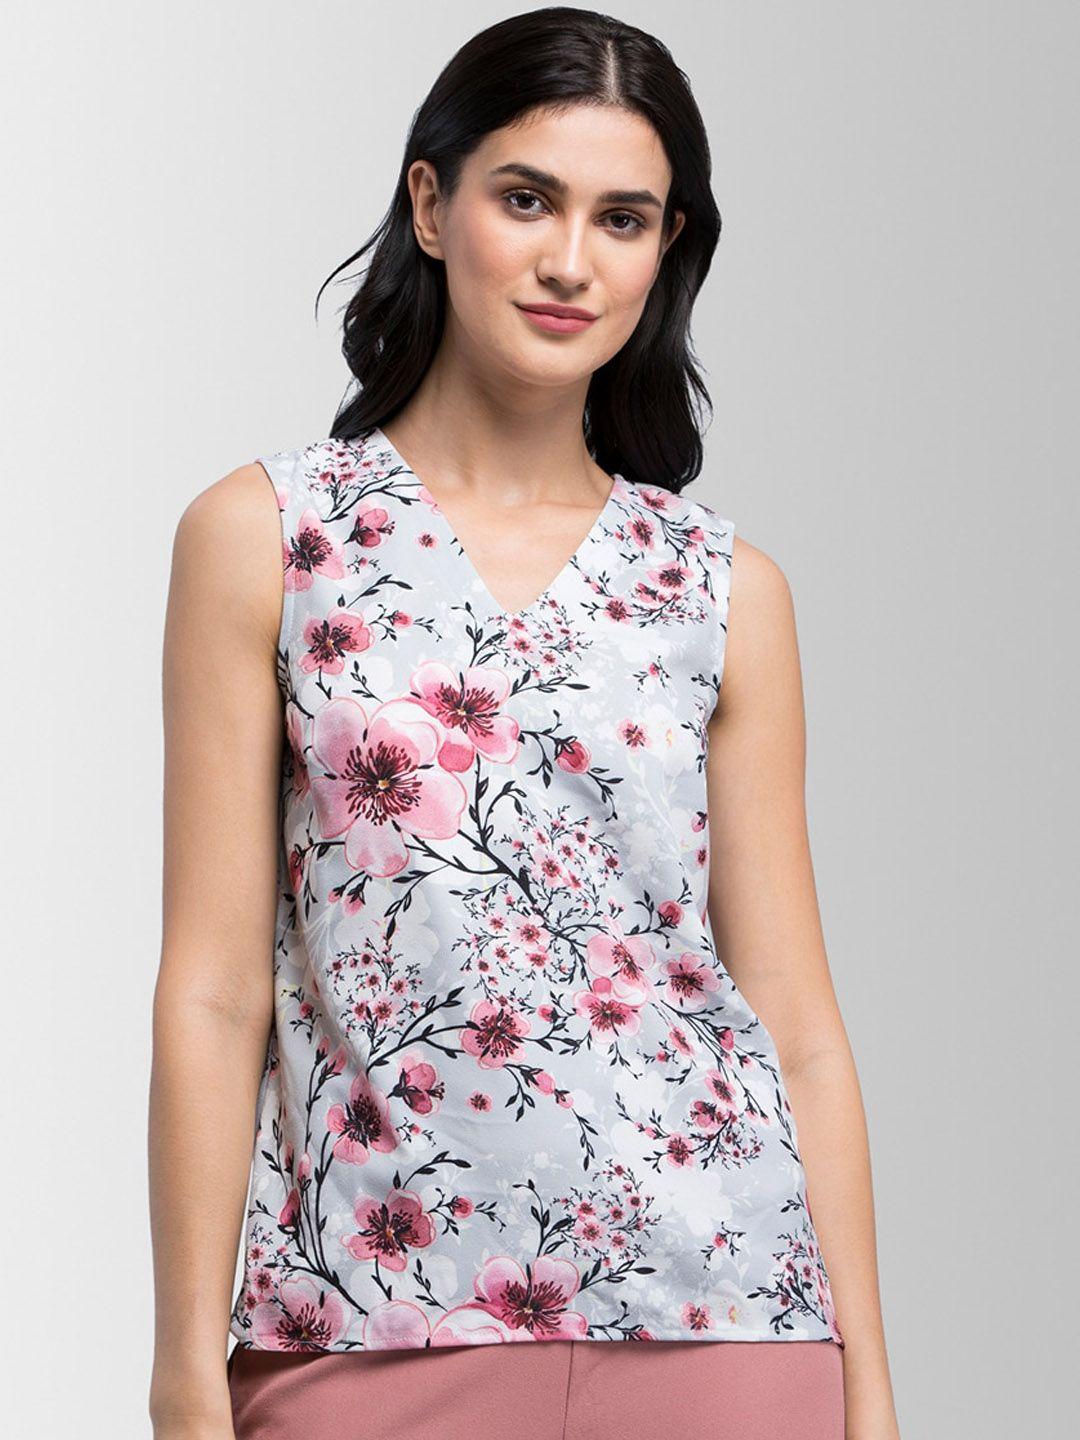 fablestreet-women-grey-floral-printed-top